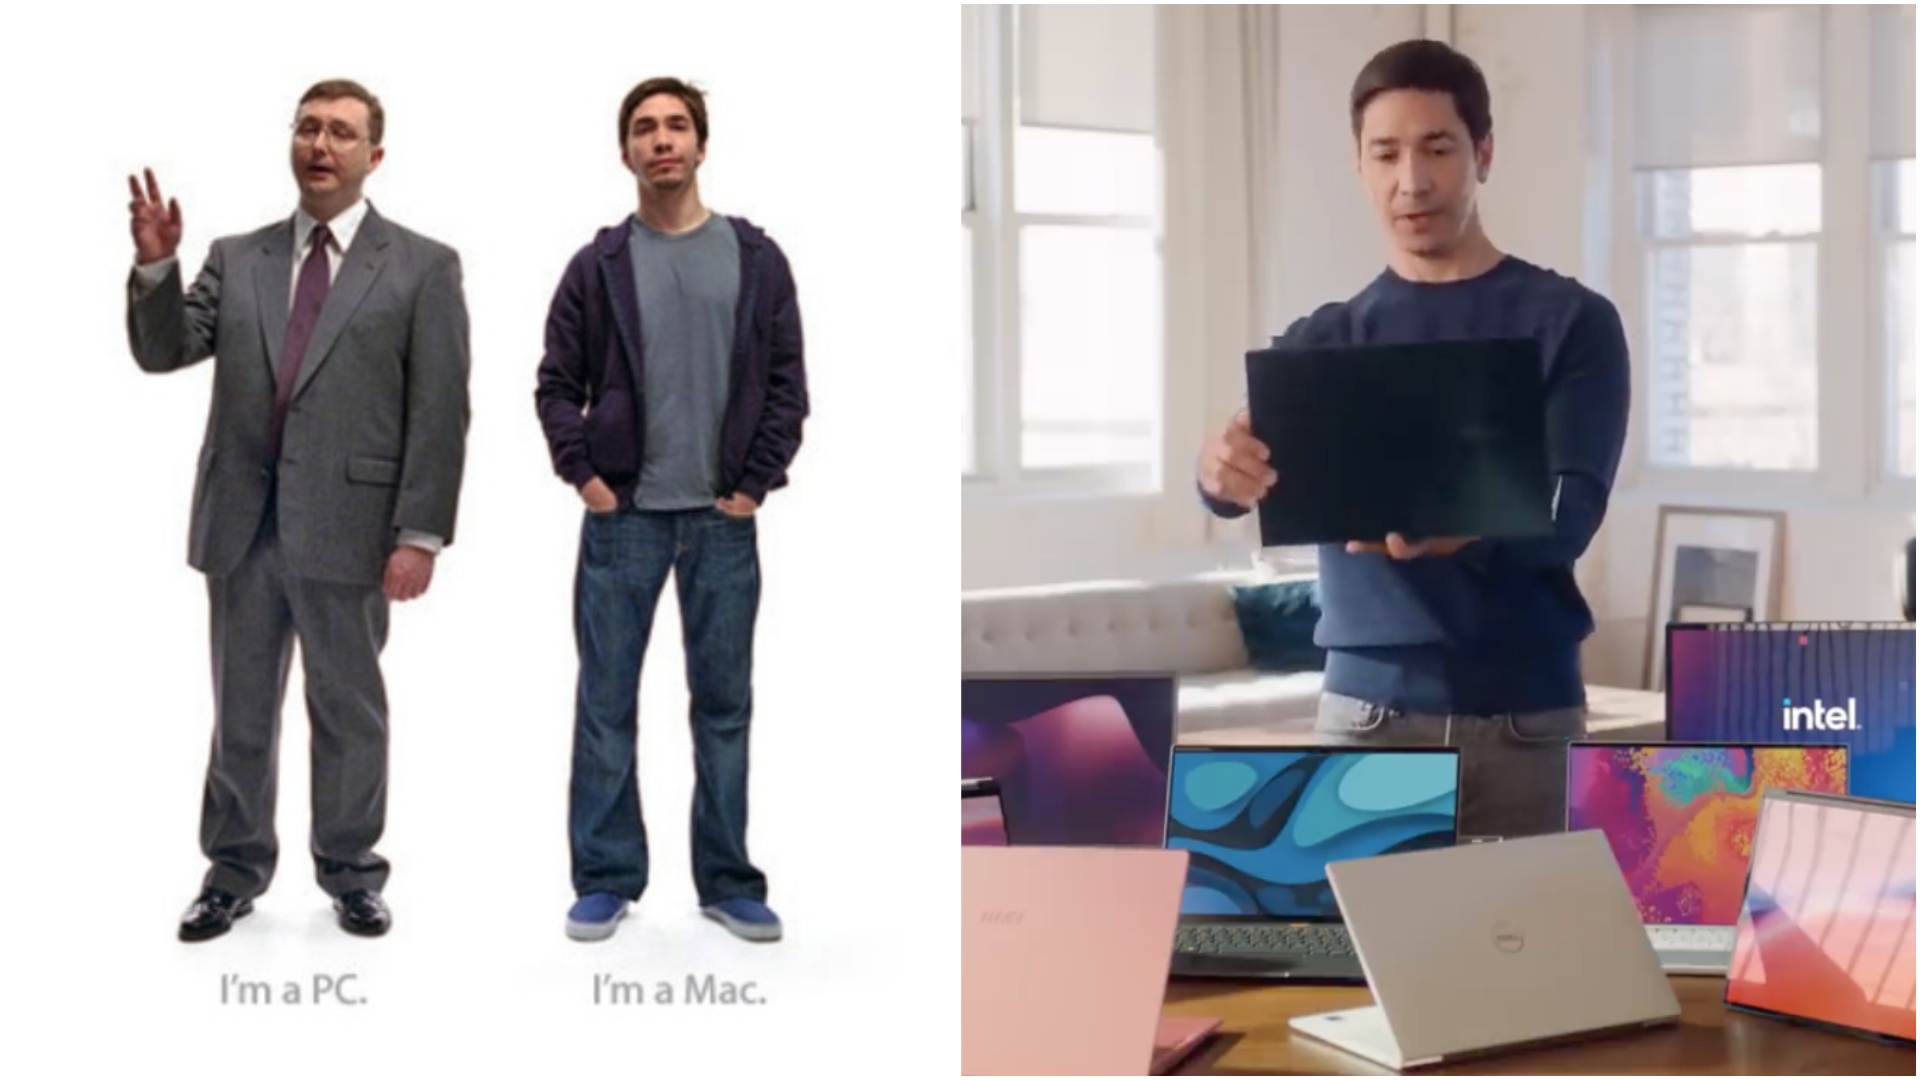 Justin Long "I'm a Mac" now for Intel